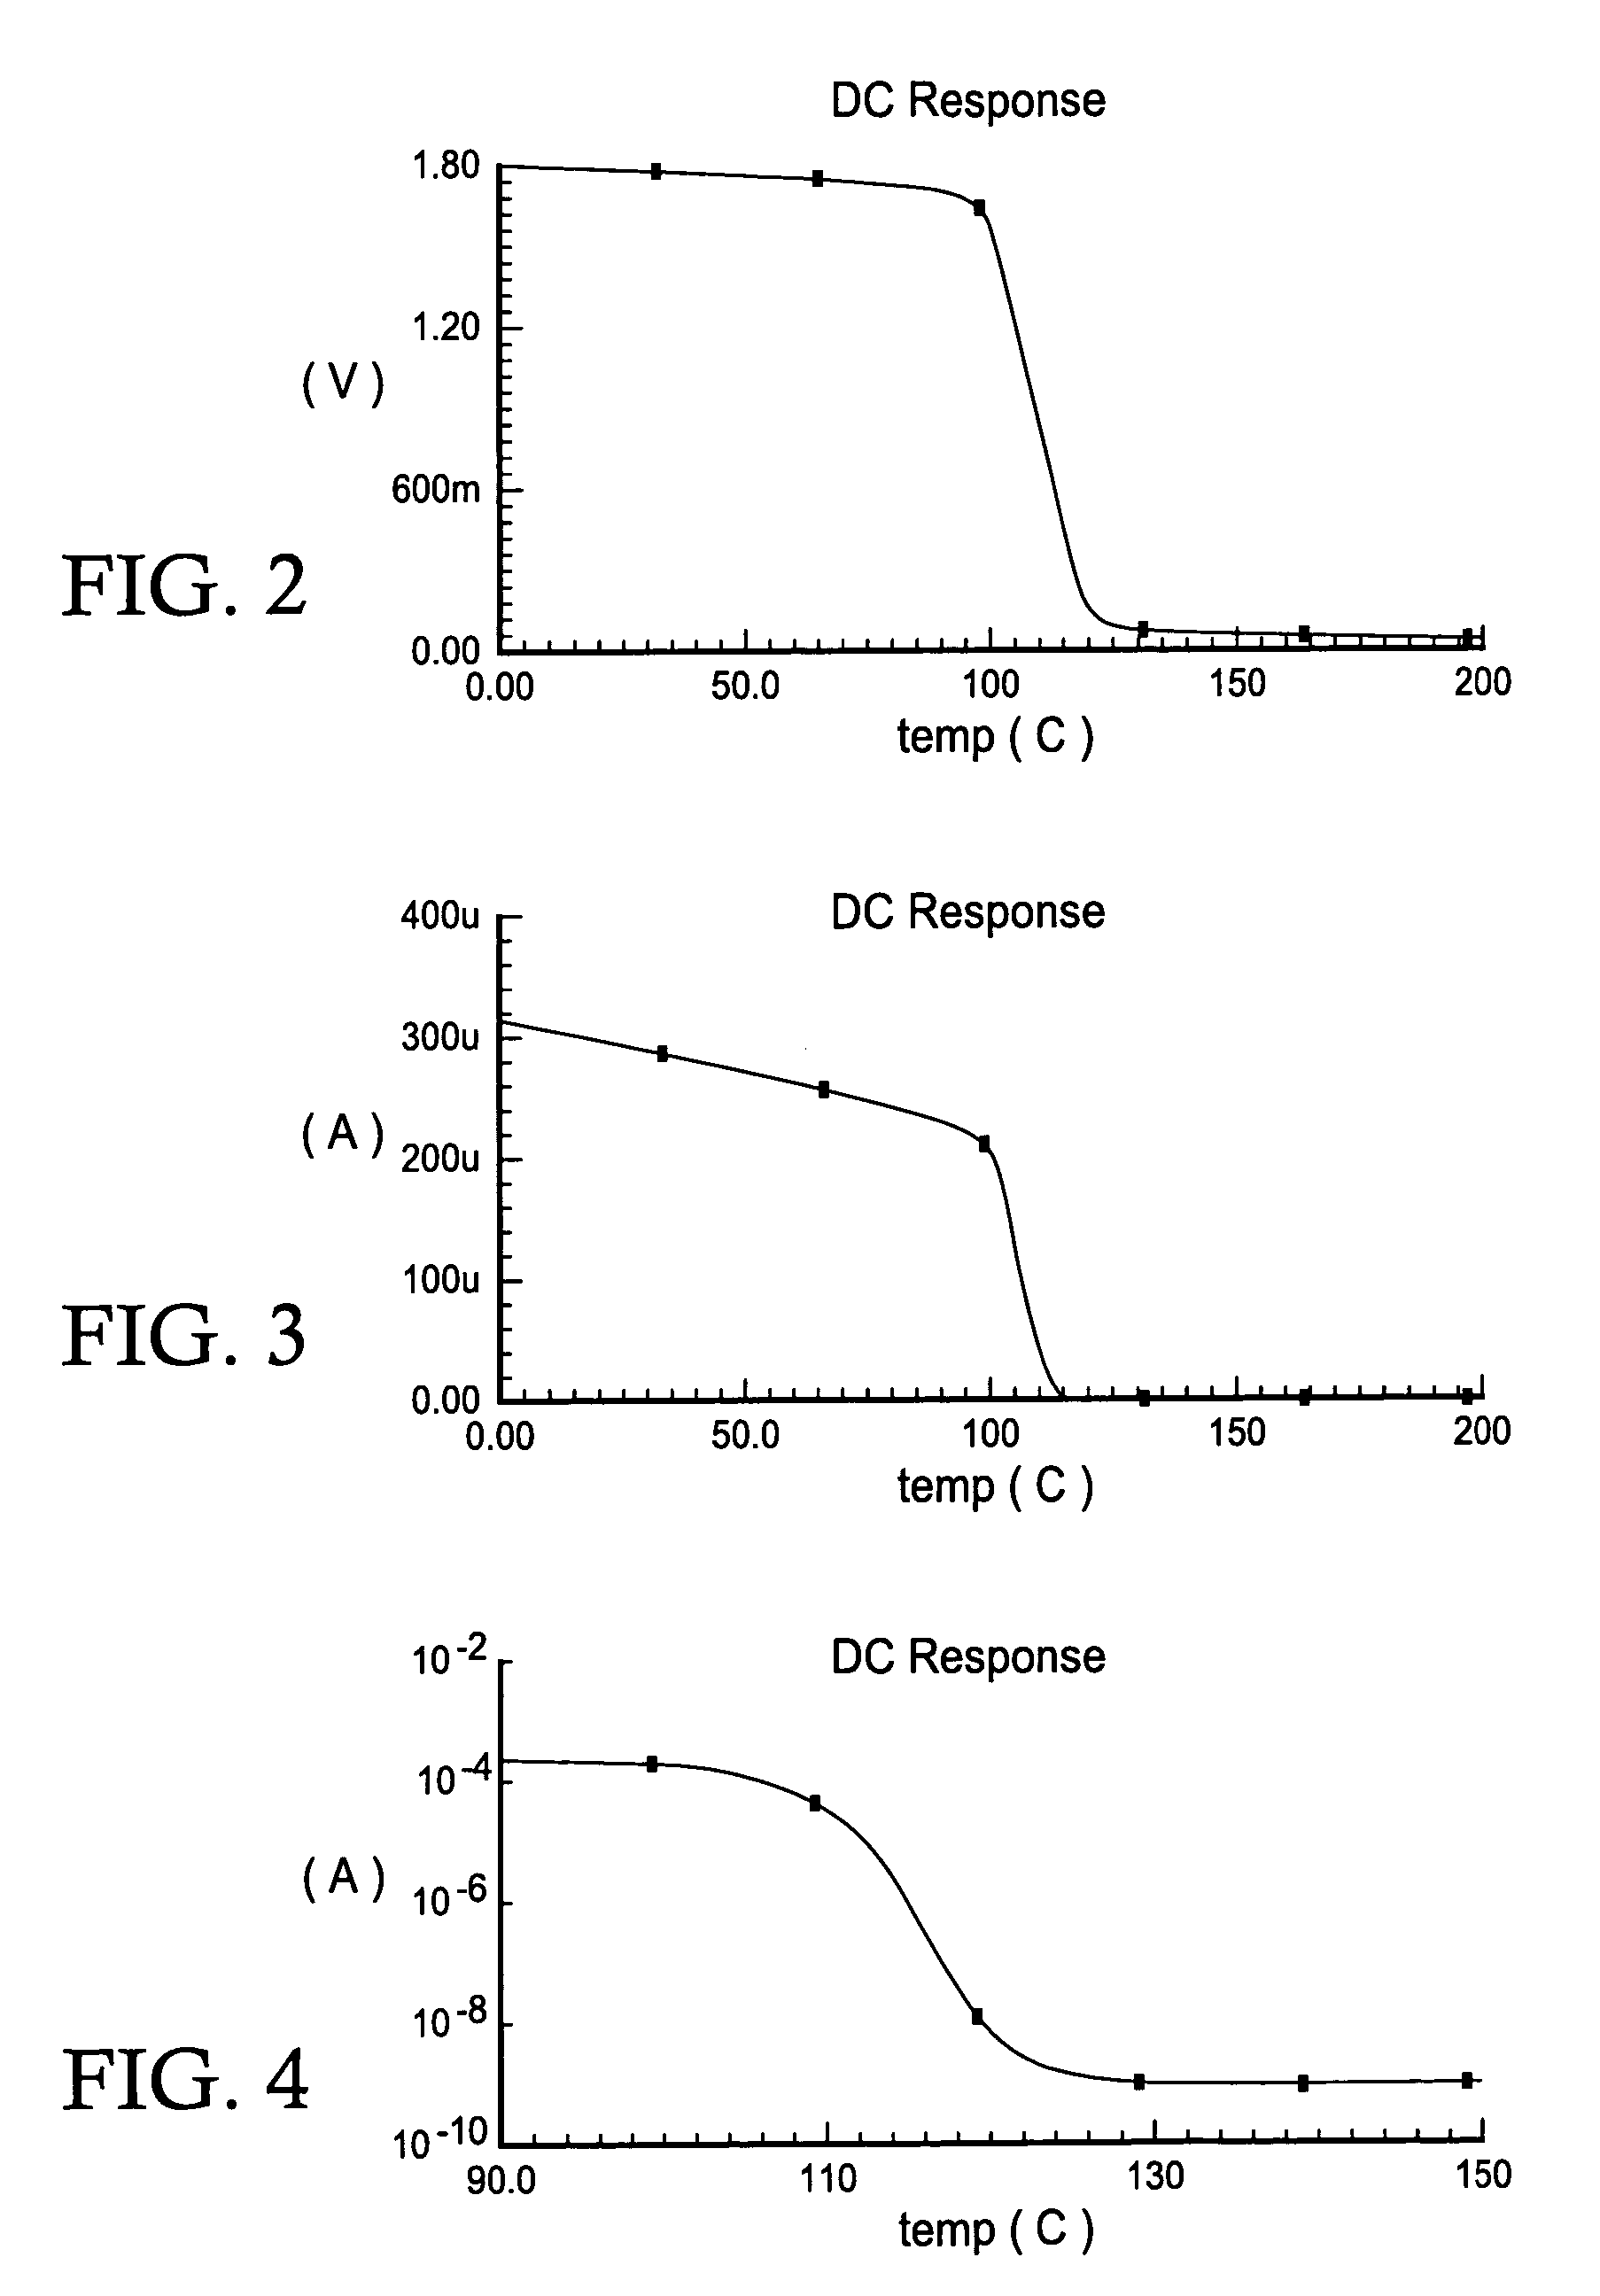 Self-timed thermally-aware circuits and methods of use thereof